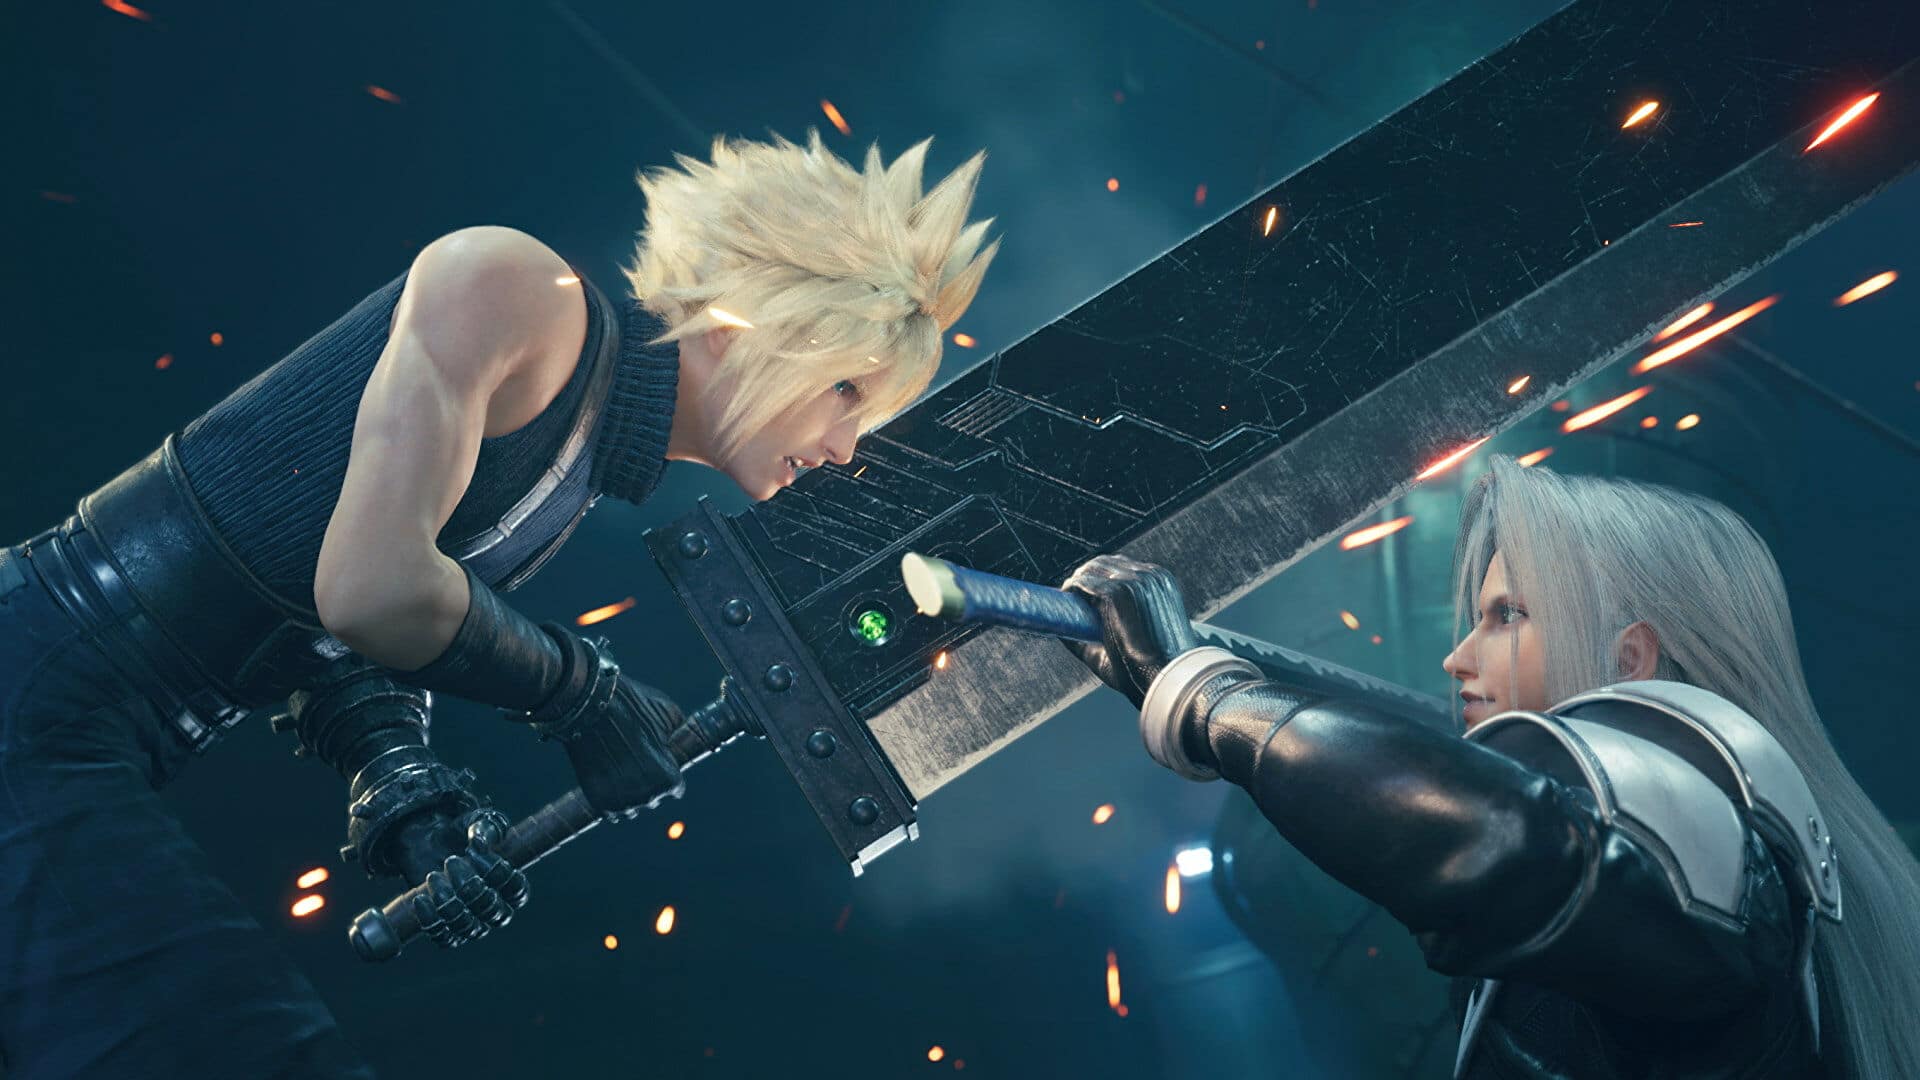 There's a Final Fantasy VII 25th anniversary live stream on June 16th